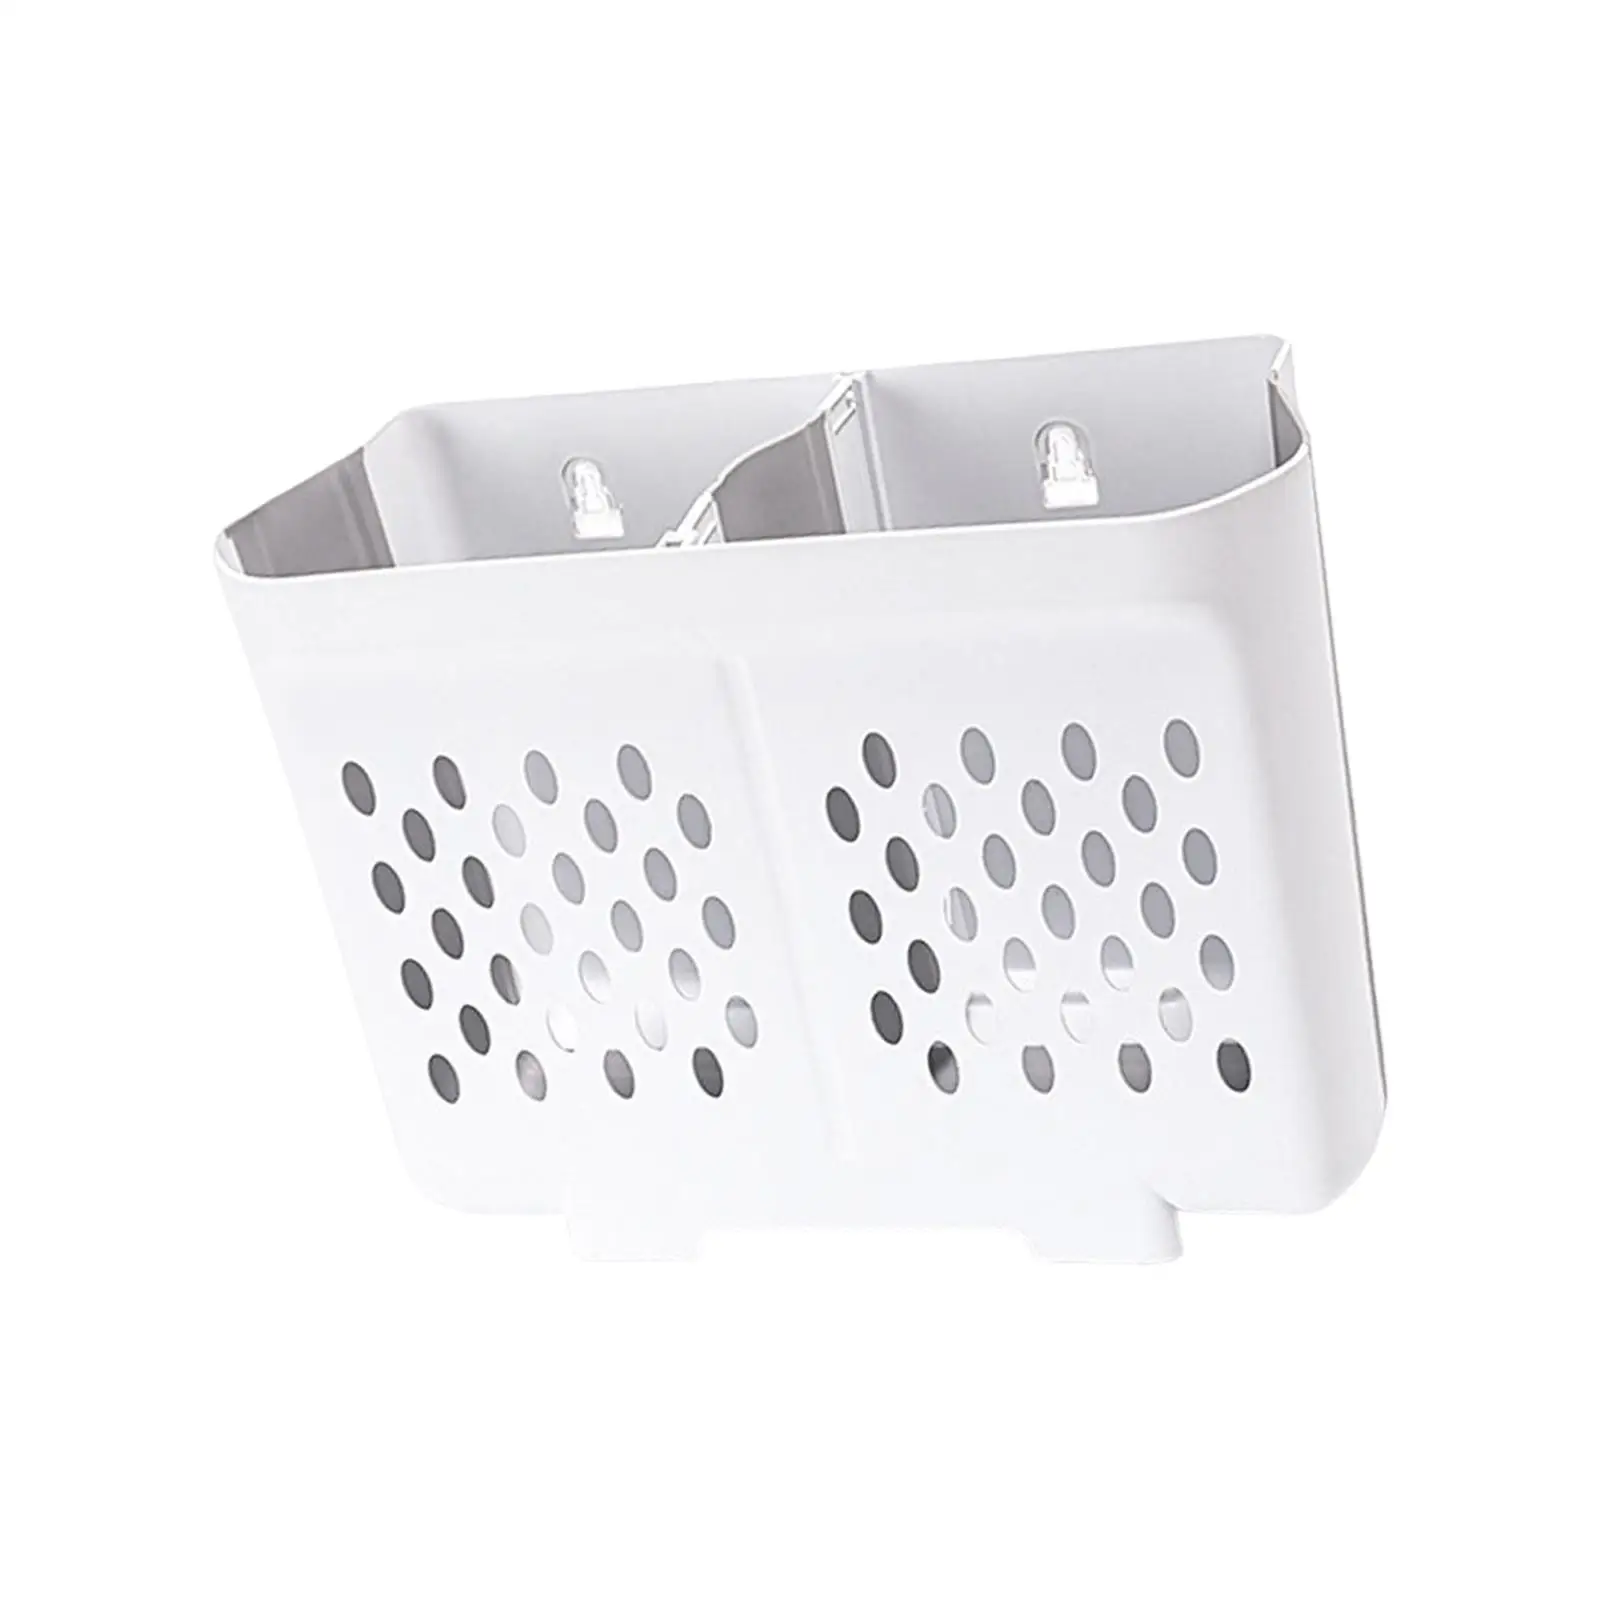 Portable Collapsible Laundry Storage Basket Wall Mounted Space Saving Convenient Accessory for Organizing Home, Clothes, Towels